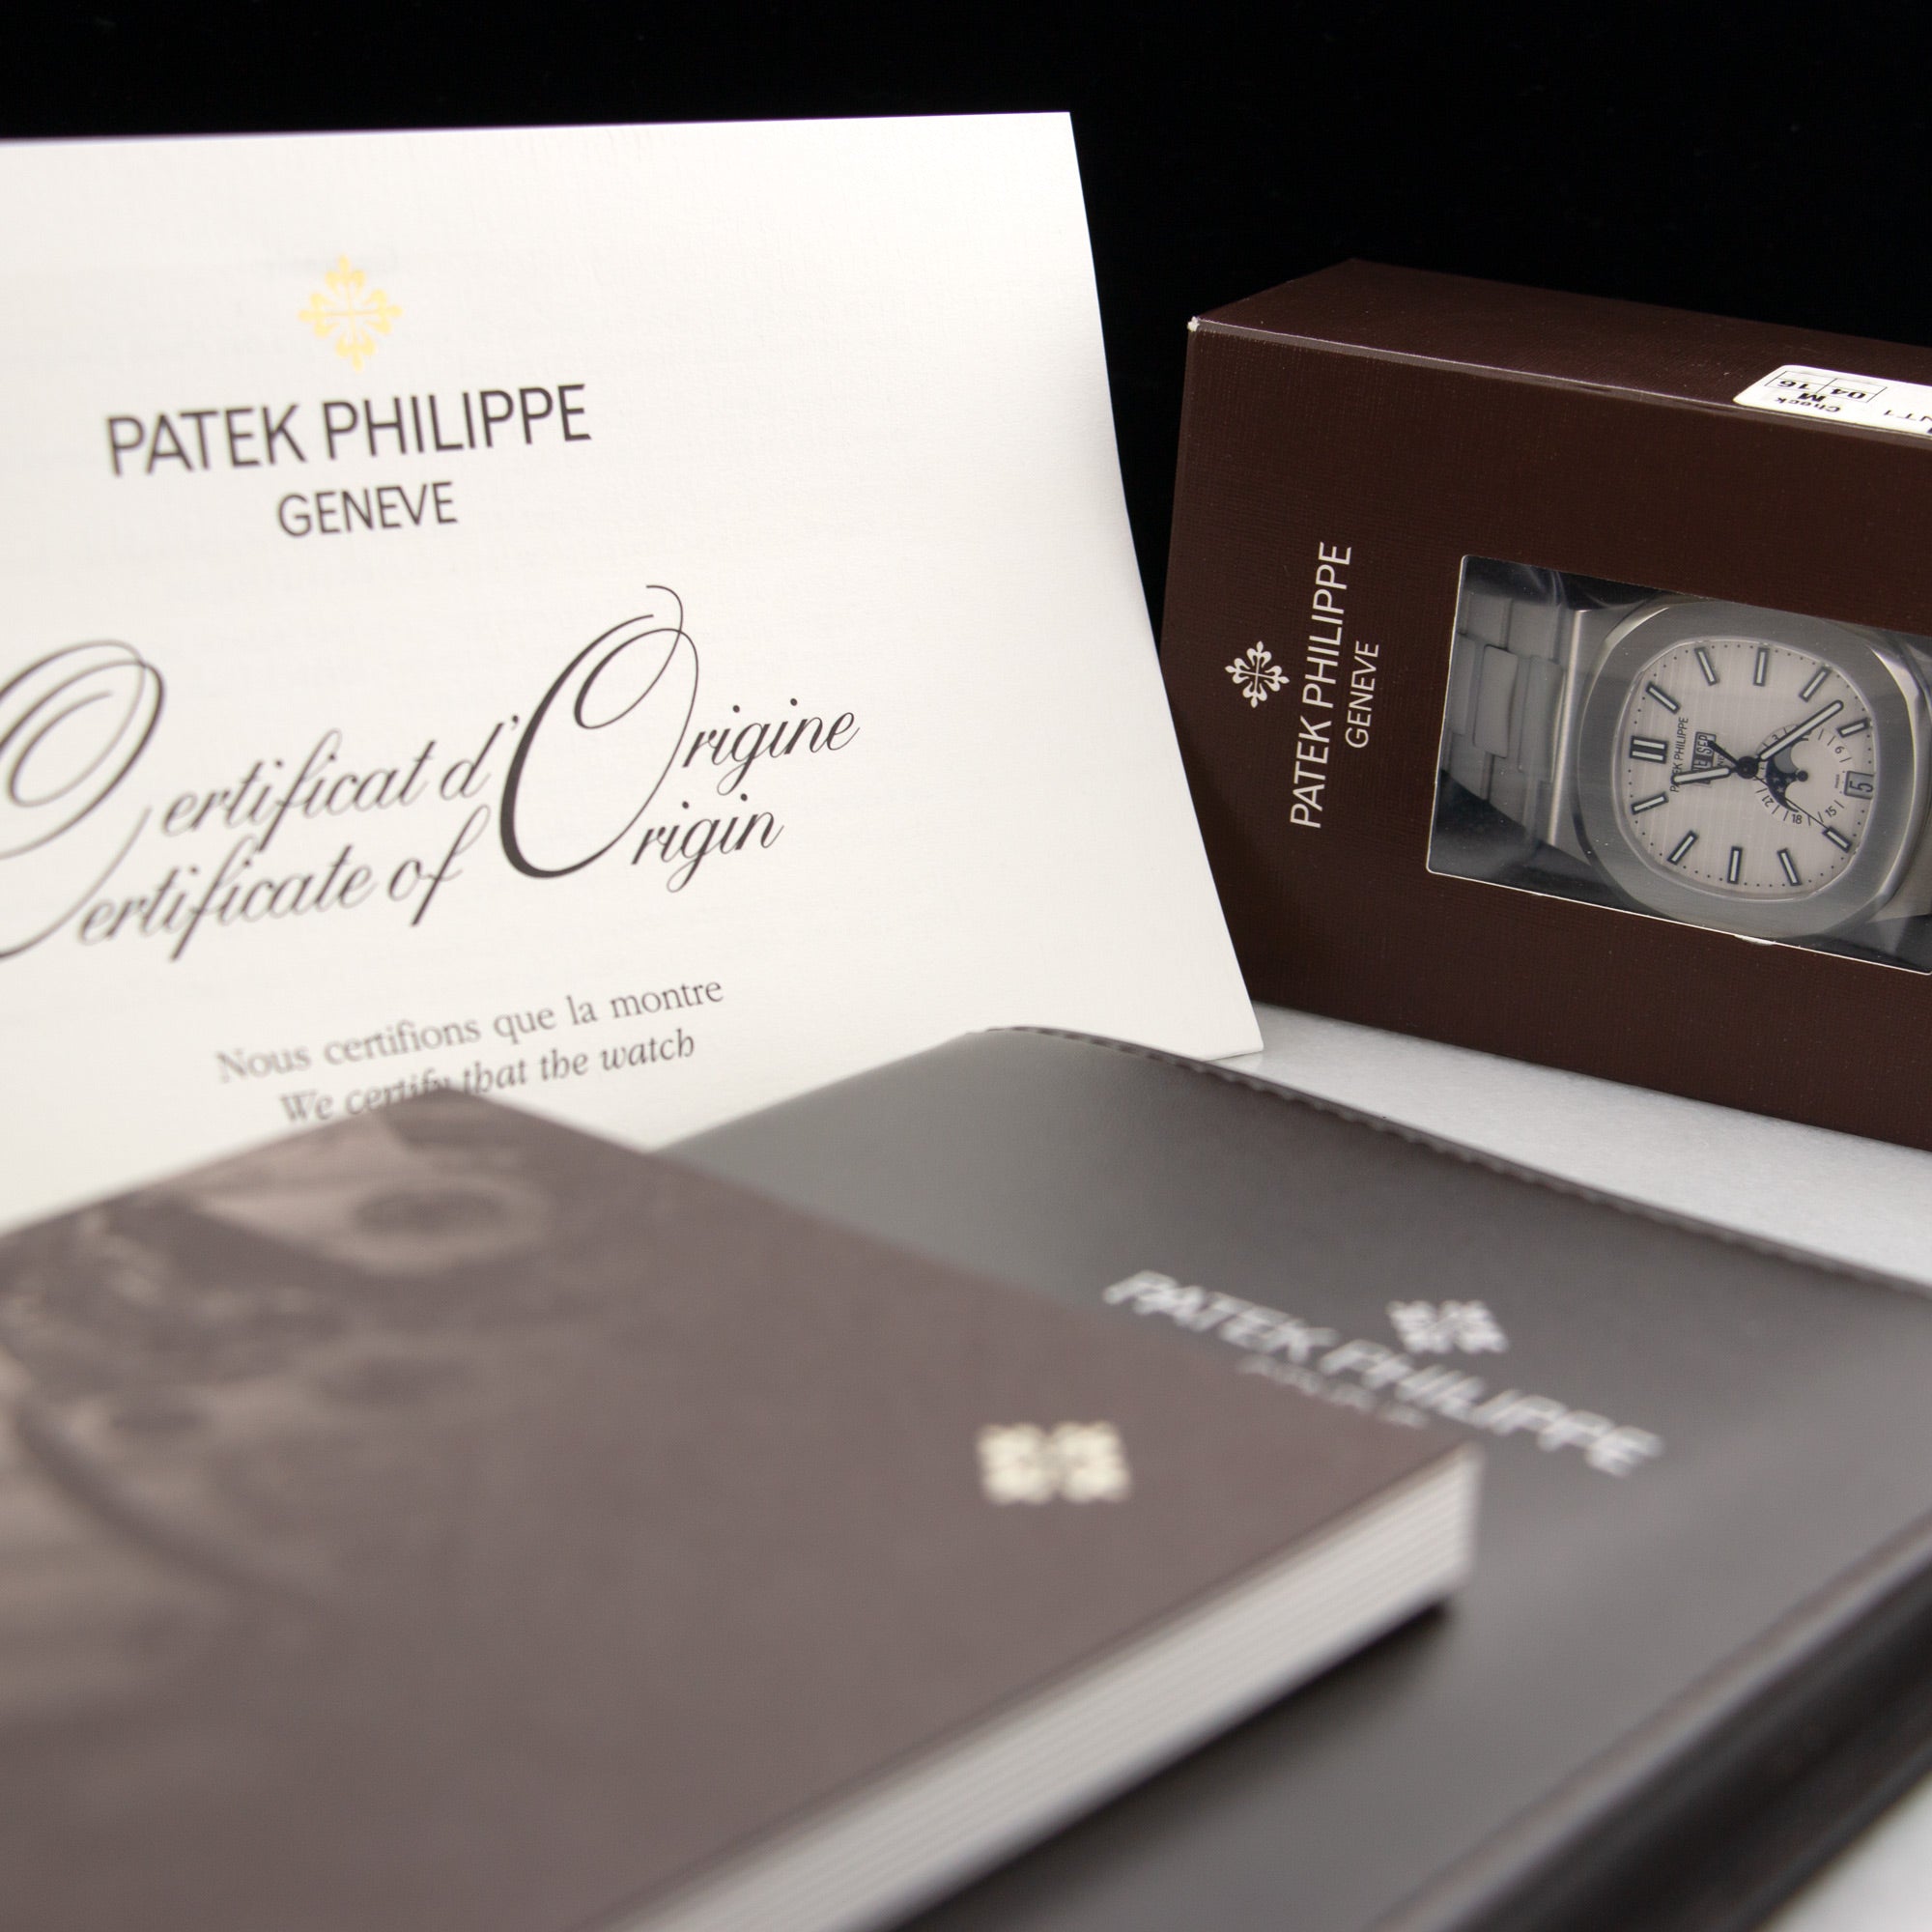 Patek Philippe - Patek Philippe Nautilus Moonphase Watch Ref. 5726 in Double Sealed and Unworn Condition - The Keystone Watches